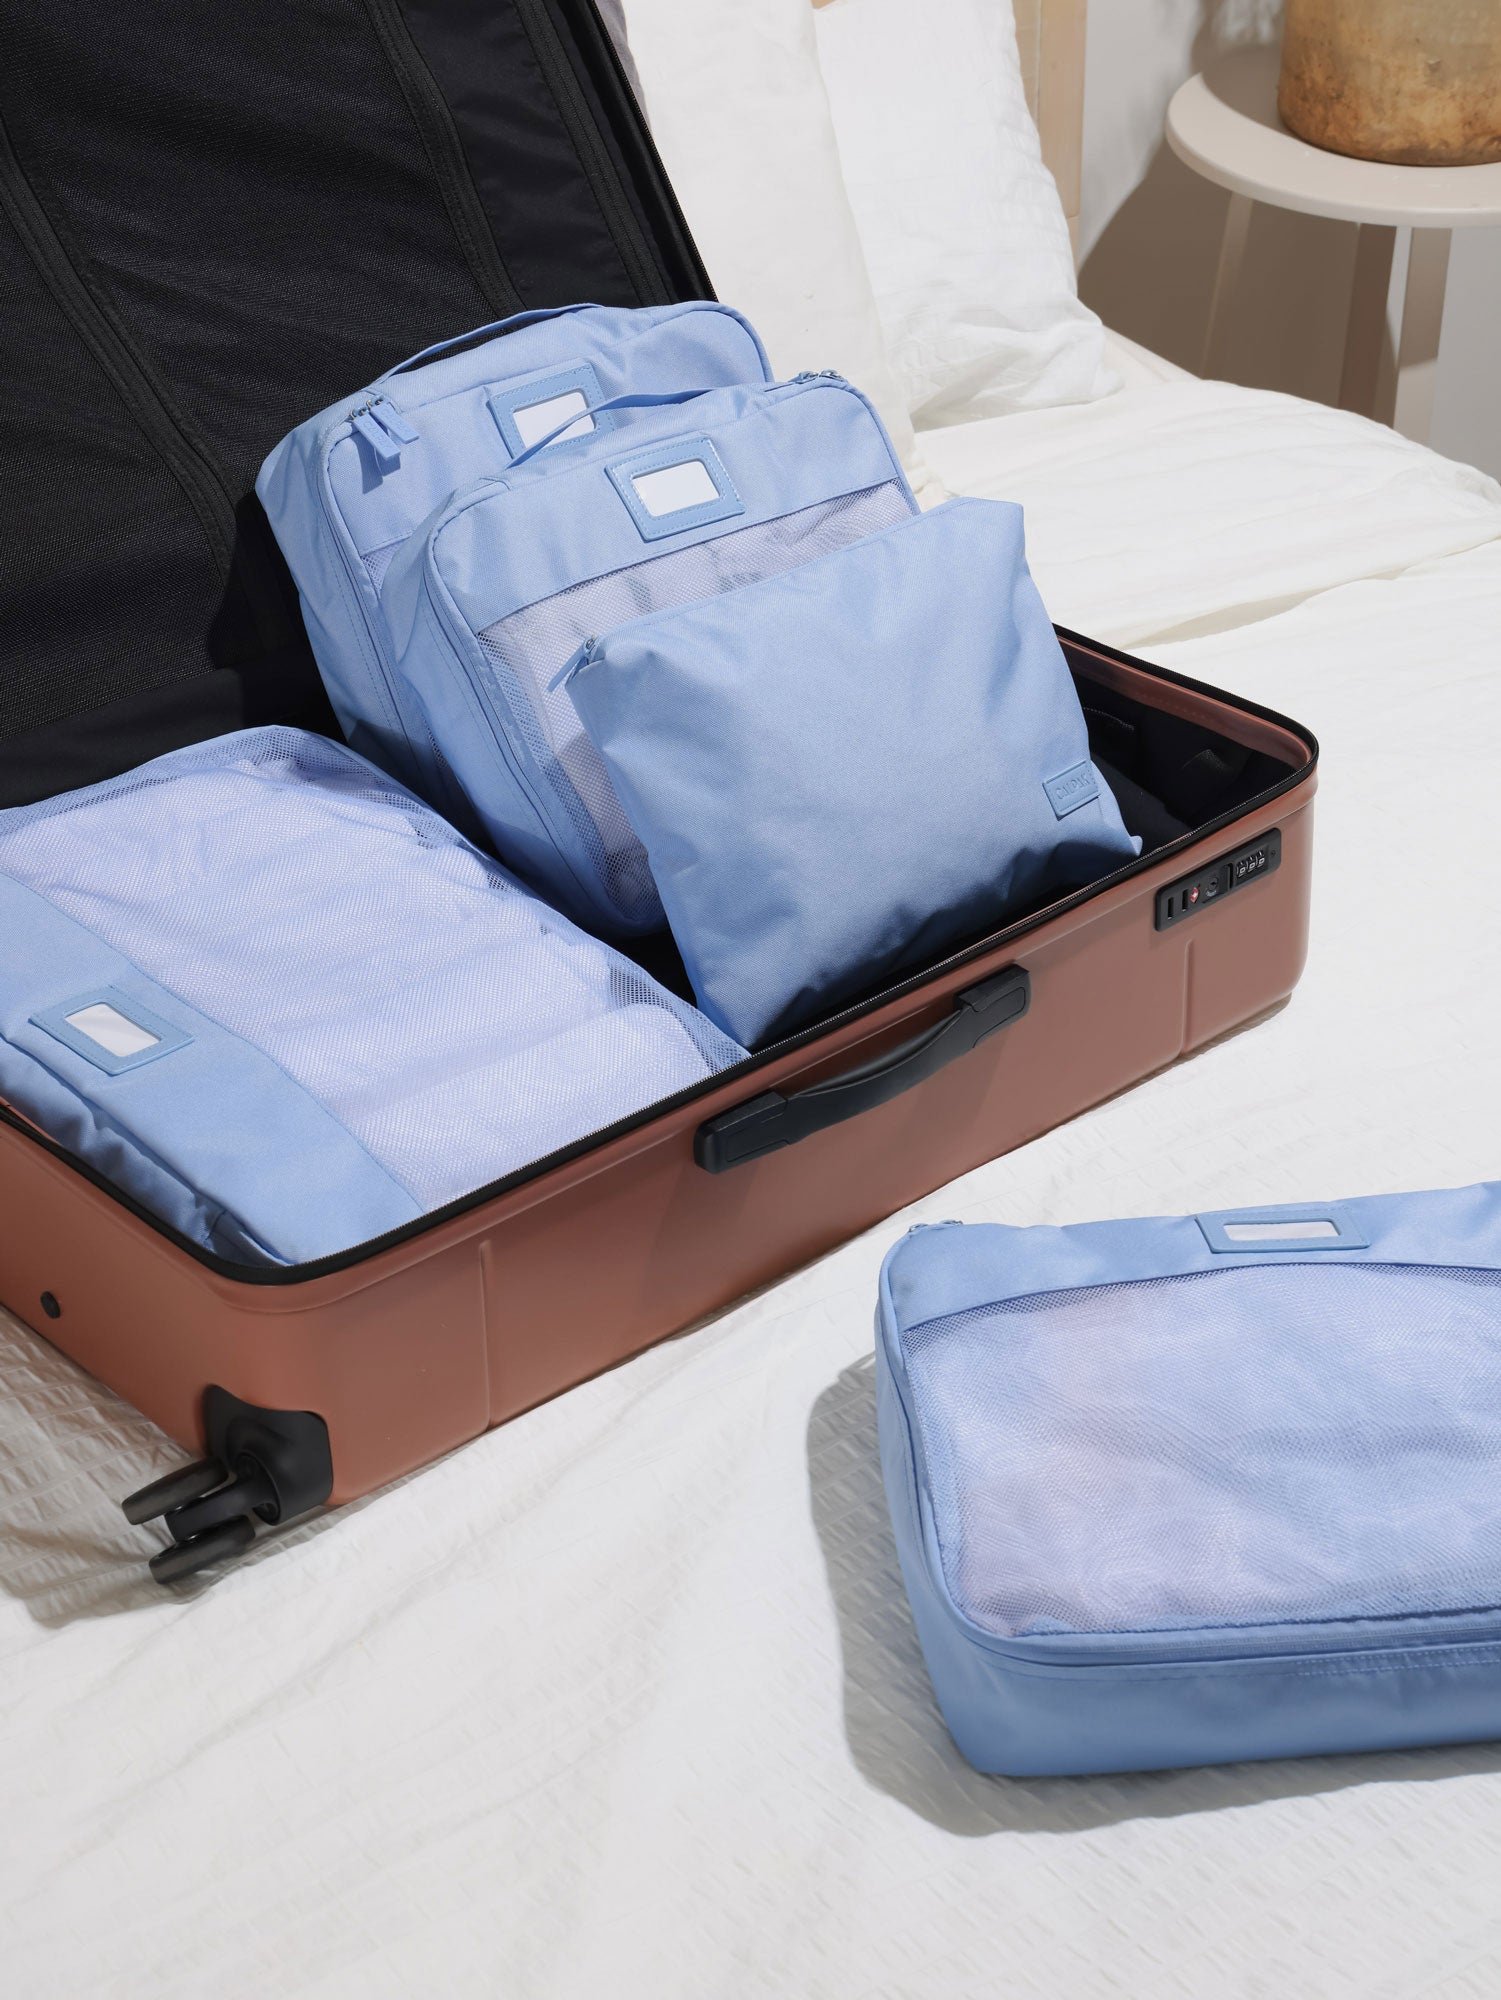 CALPAK 5 piece set packing cubes for travel with labels and top handles mesh front in sky blue